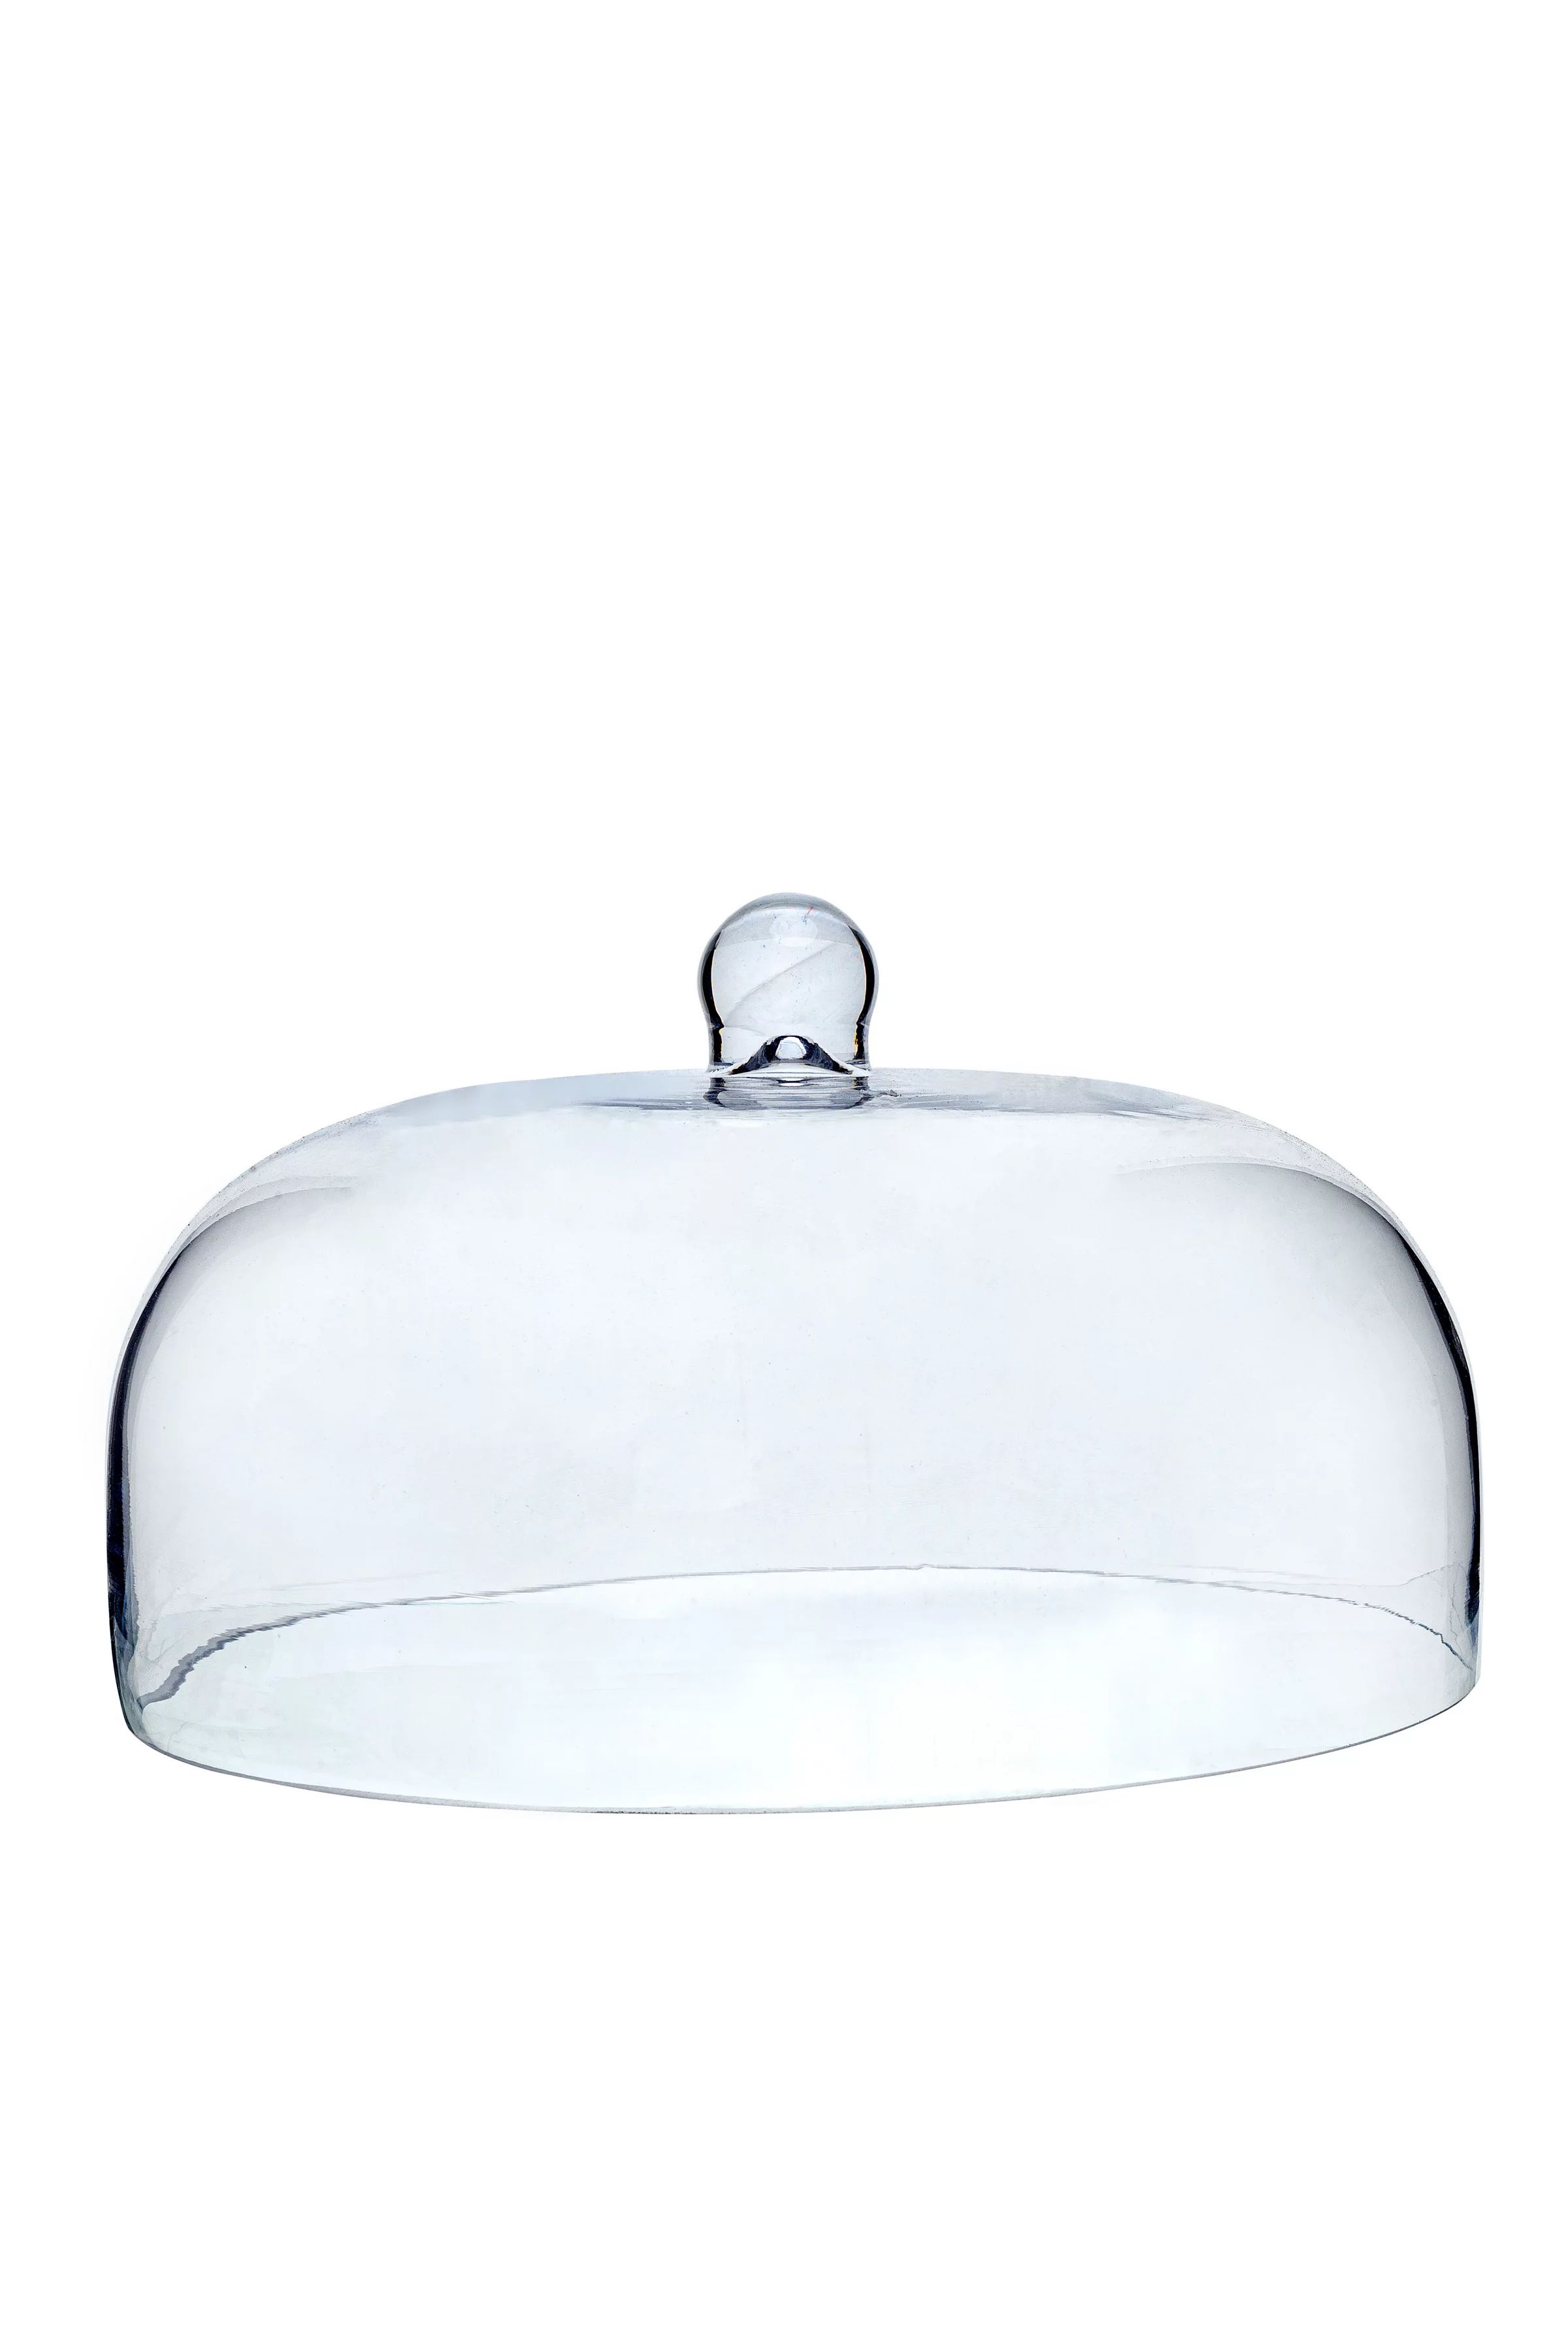 Better Homes & Gardens Clear Round Glass Dome with Knob | Walmart (US)